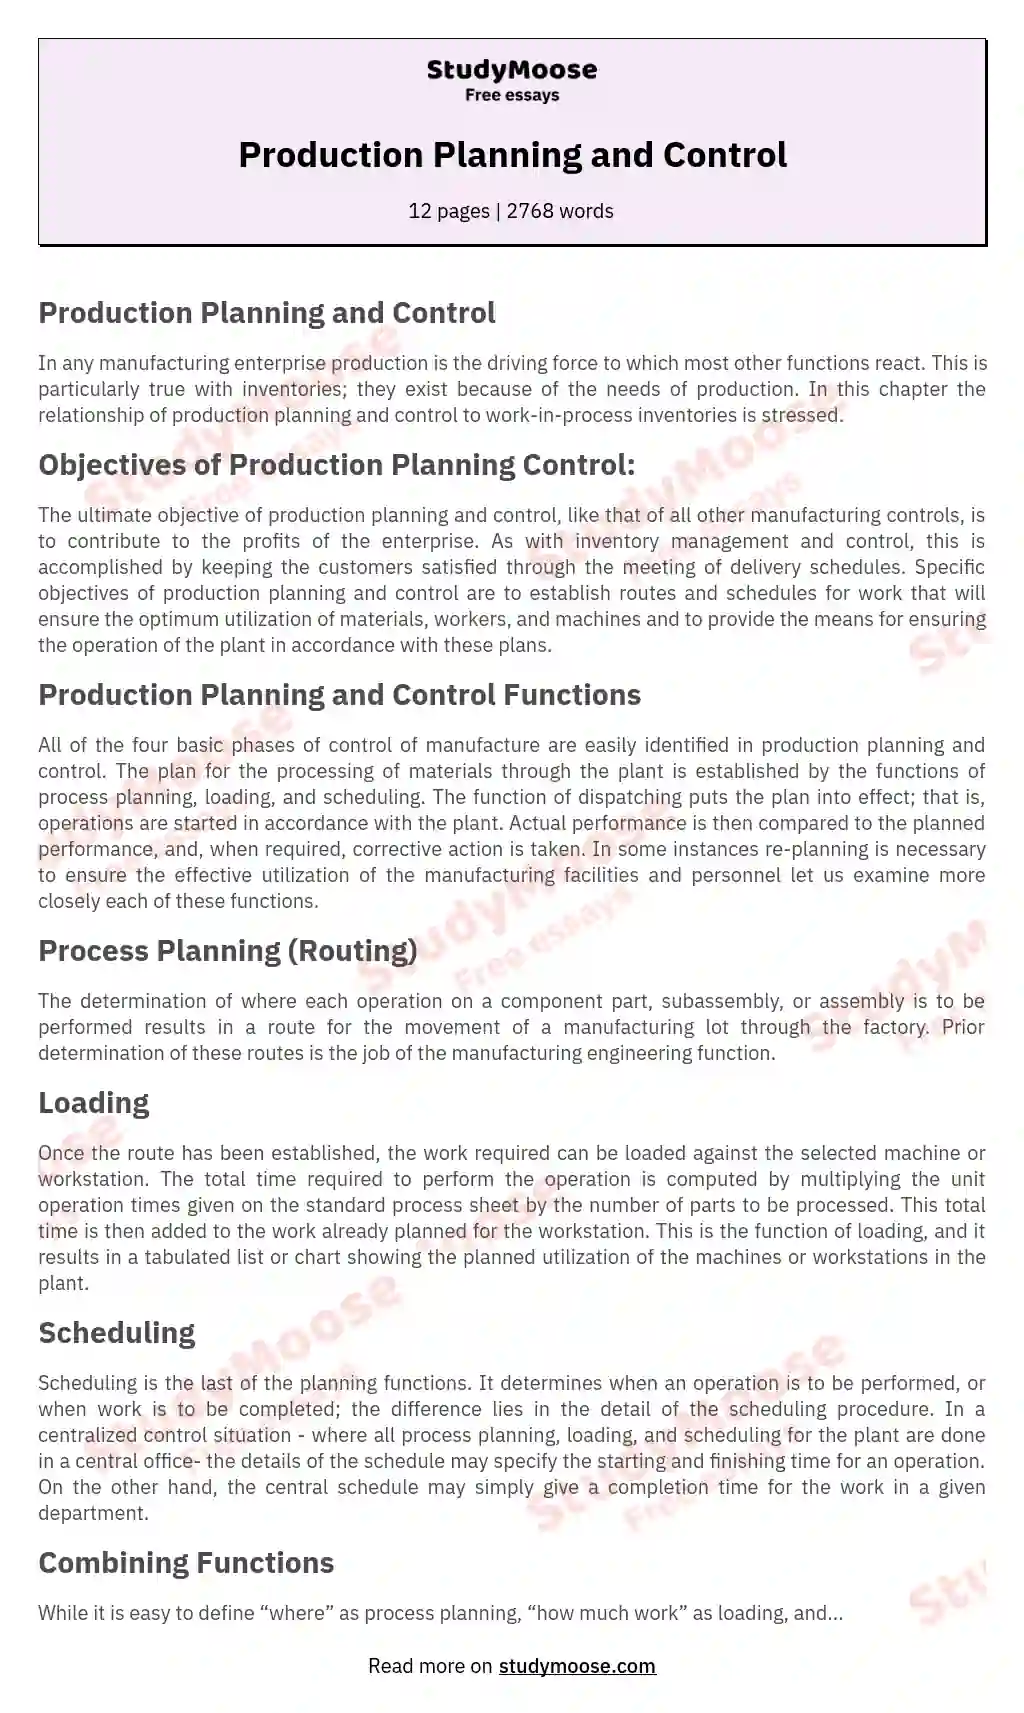 Production Planning and Control essay